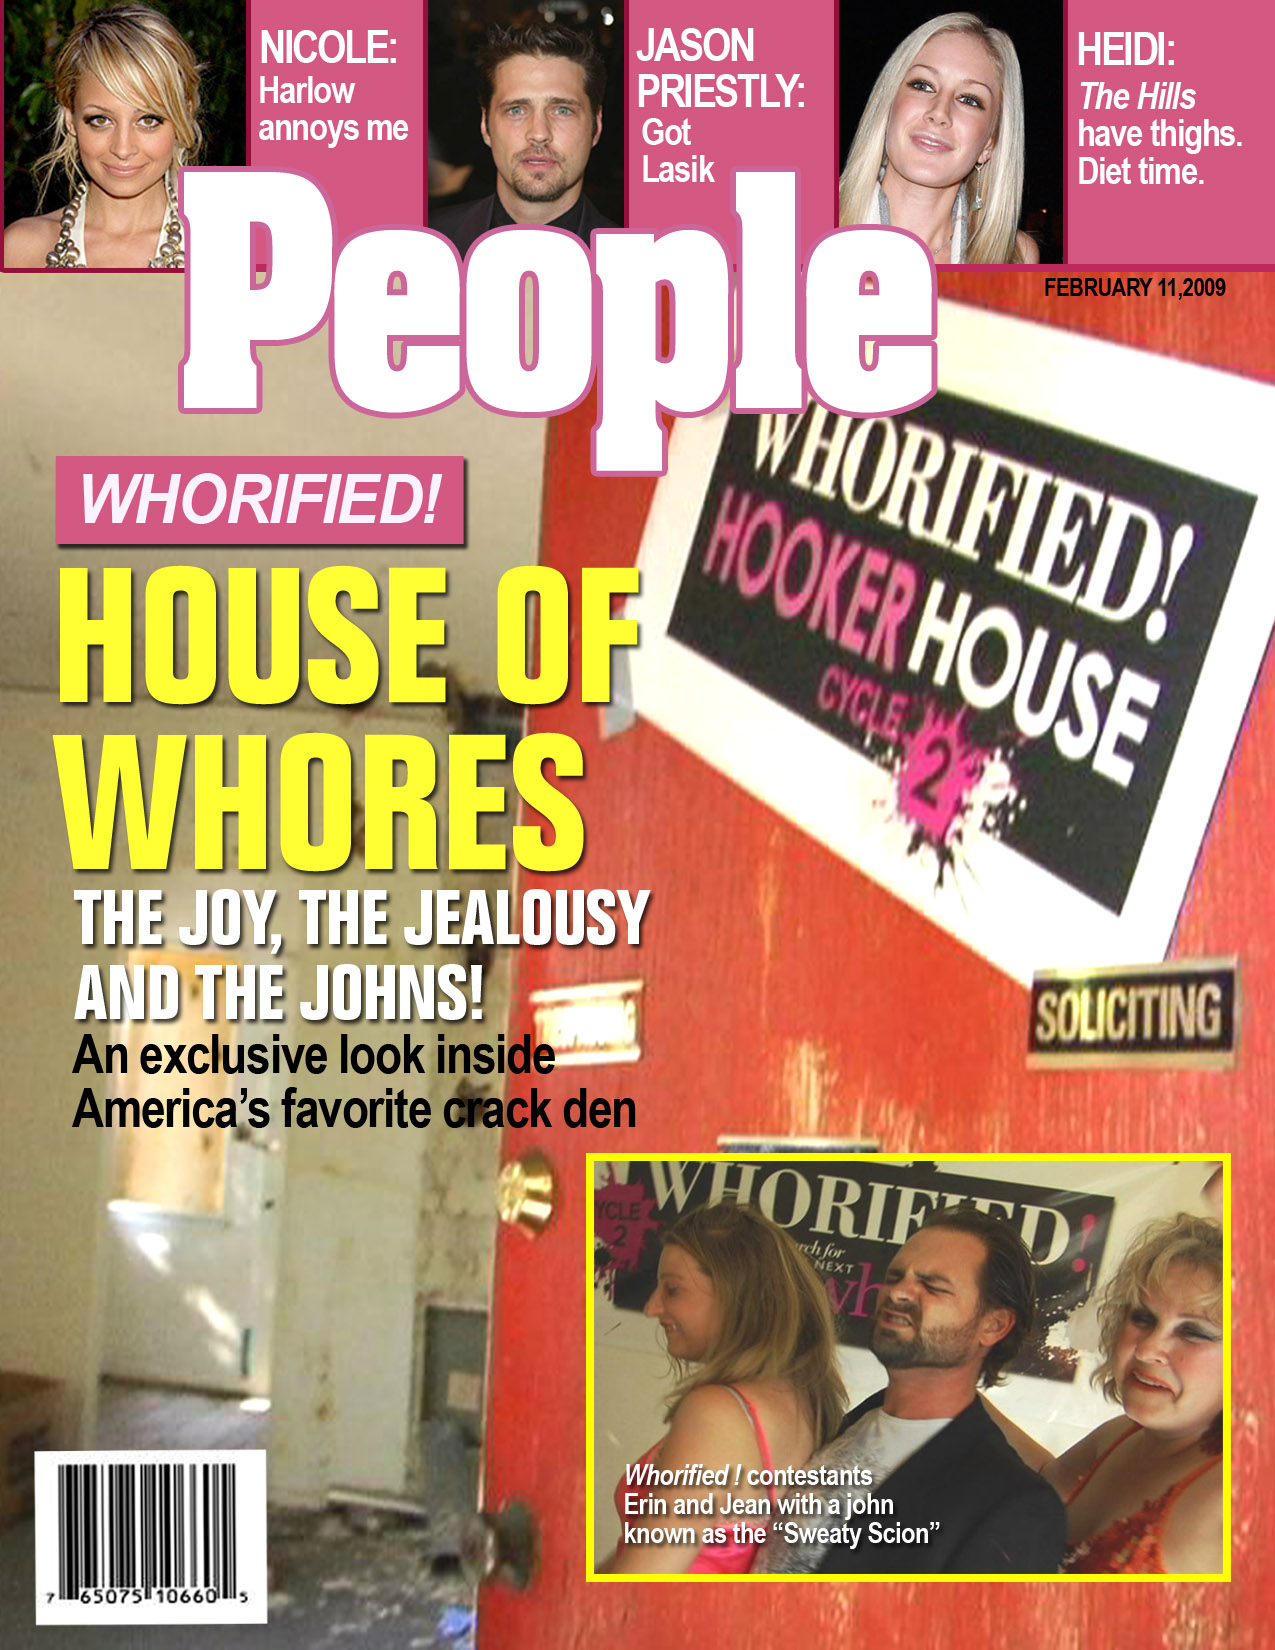 Whorified! The Search for America's Next Top Whore